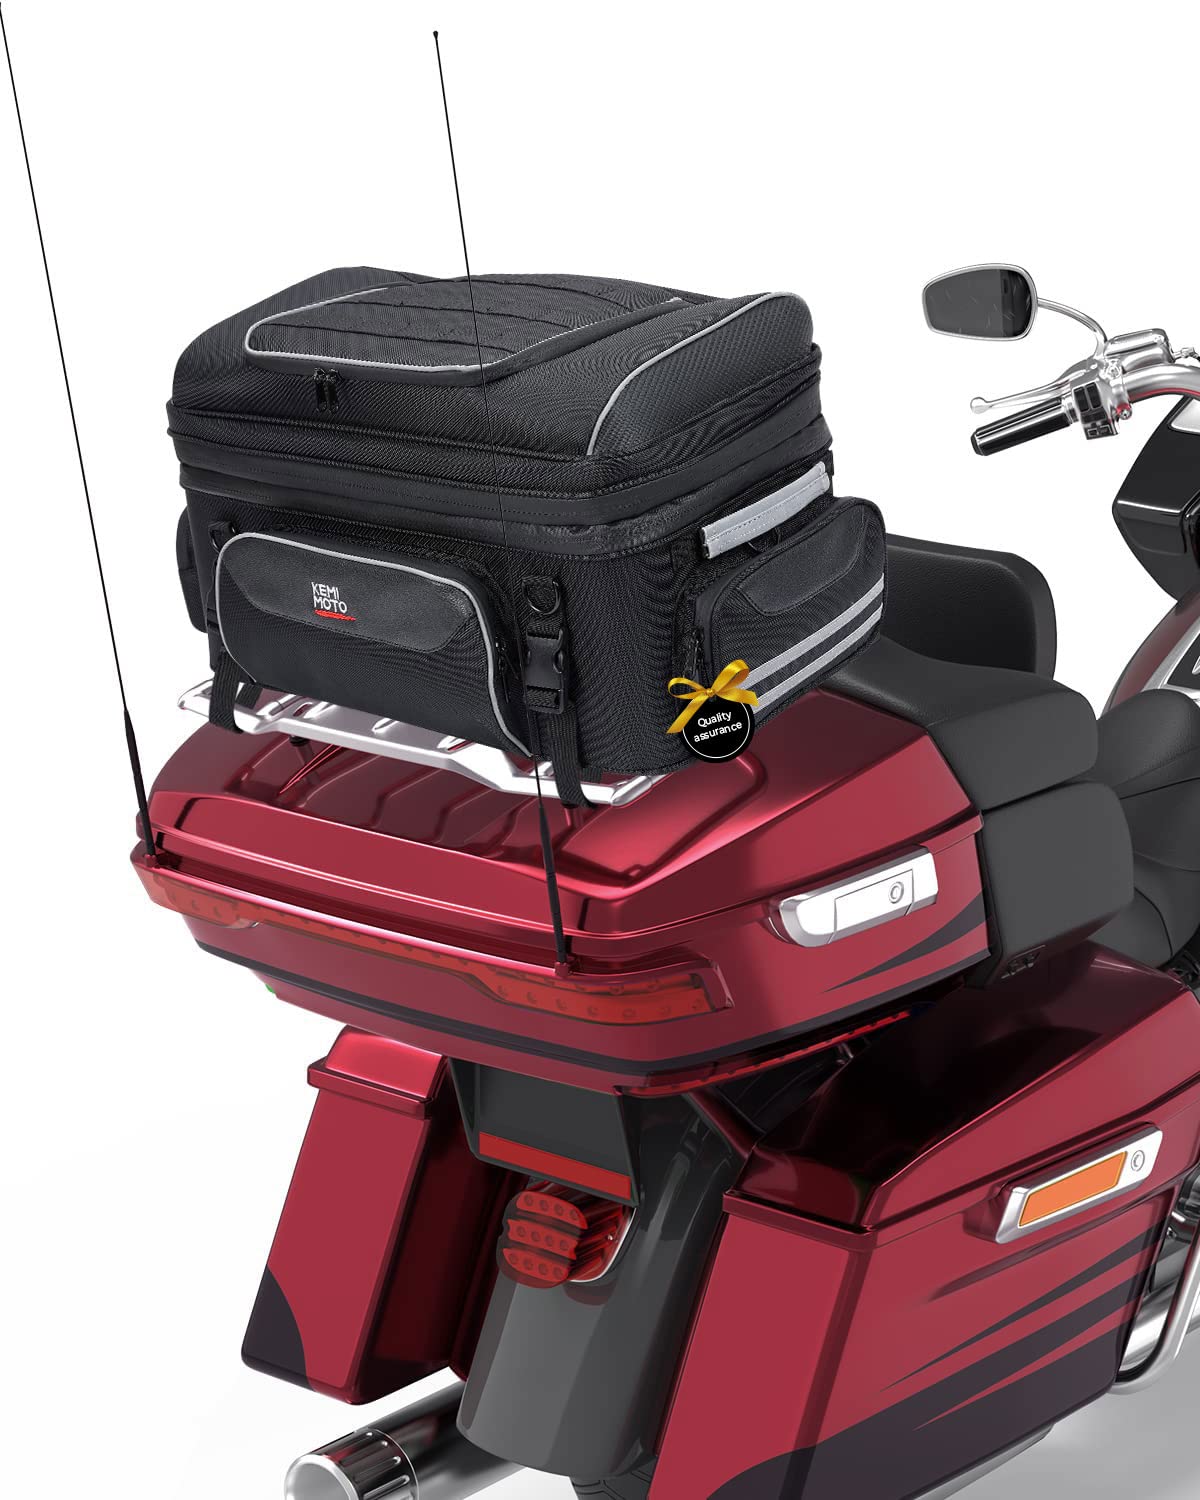 Motorcycle Travel Luggage, Collapsible Trunk Bag with Bar Straps